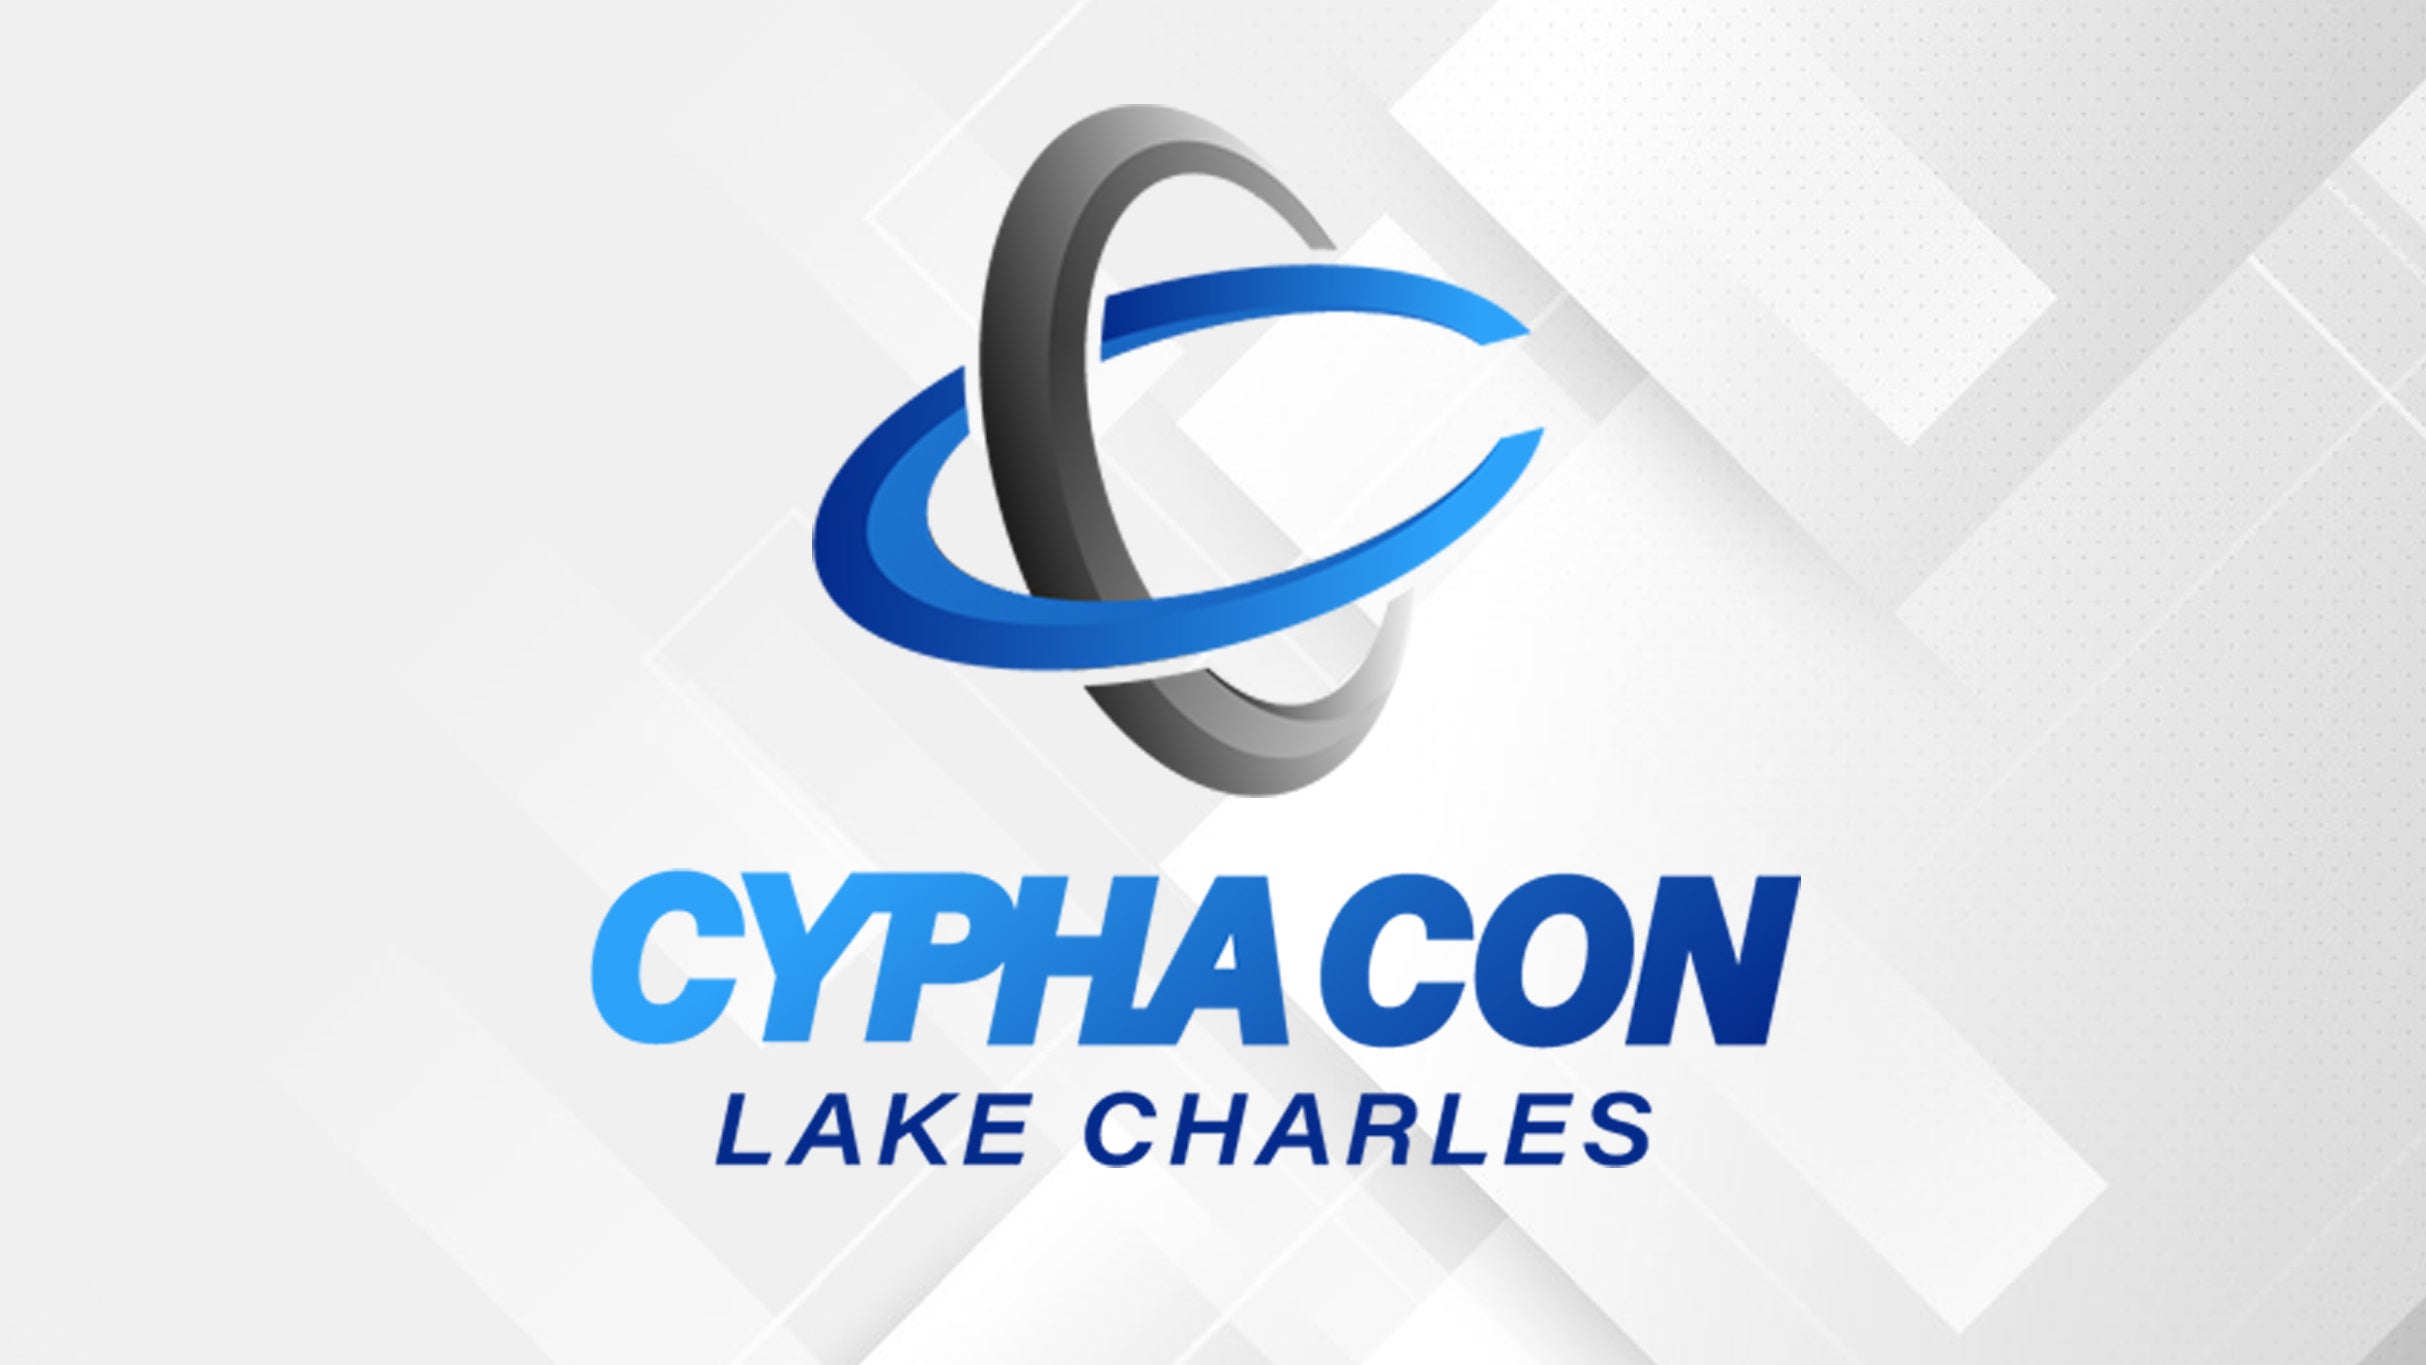 Cyphacon 2023 - Weekend Pass in Lake Charles promo photo for $62.00 Military  presale offer code